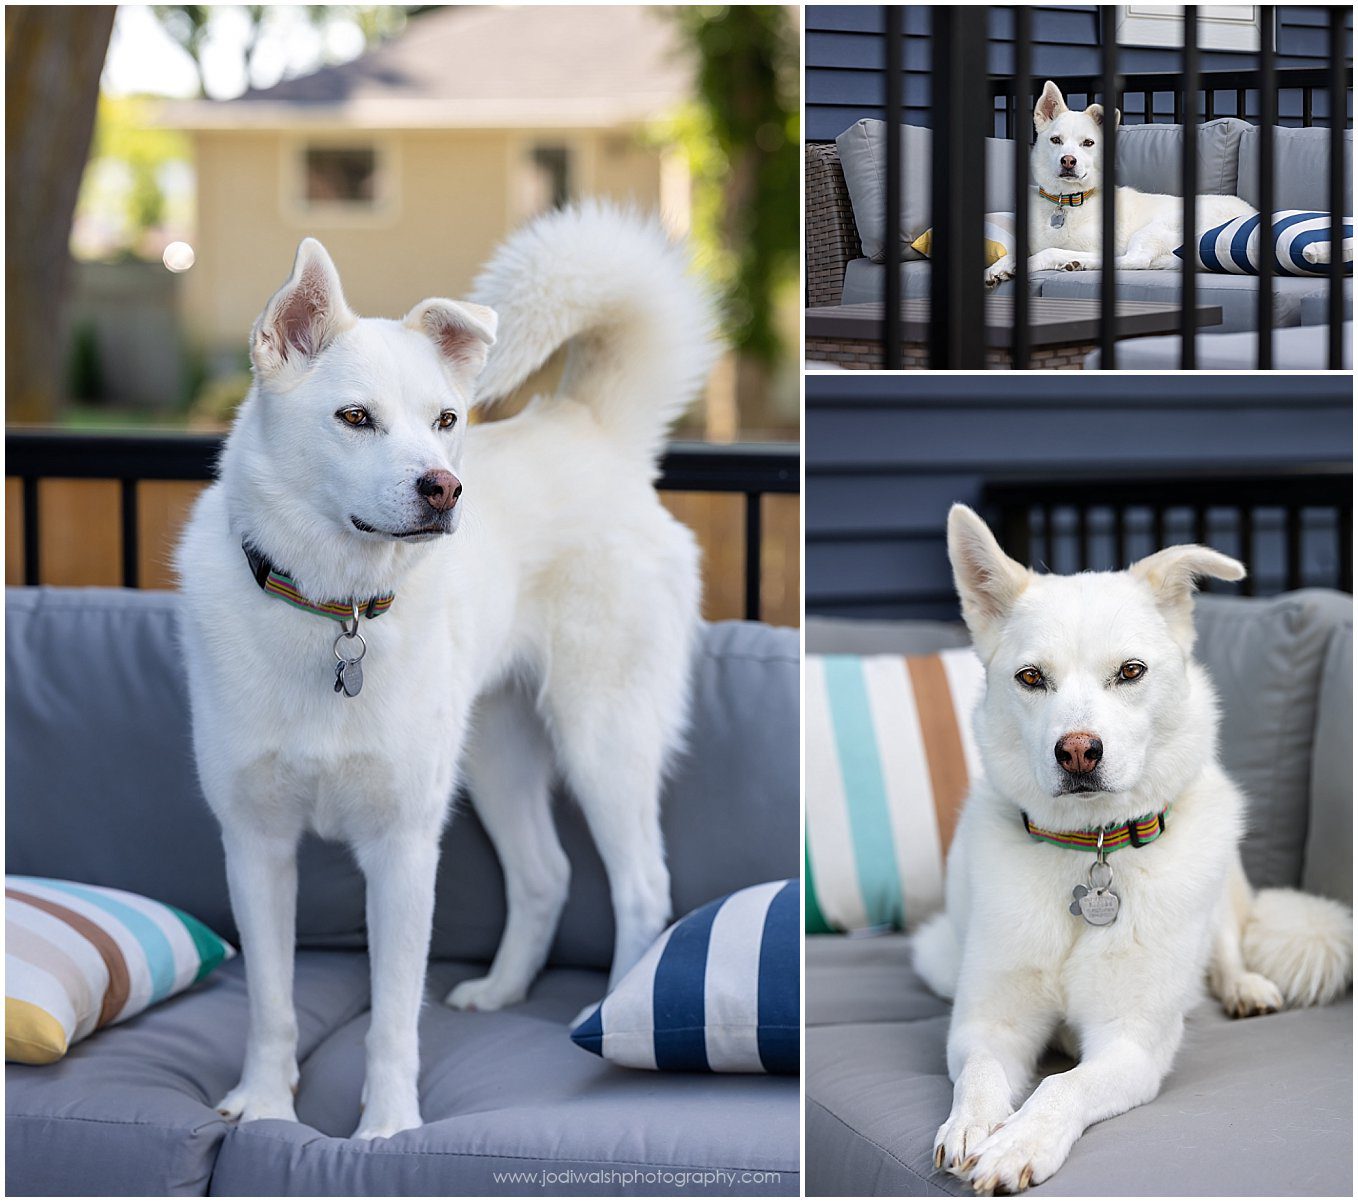 a collage of images of a white dog sitting on a porch.  She has medium length fur and is sitting on a gray outdoor chair.